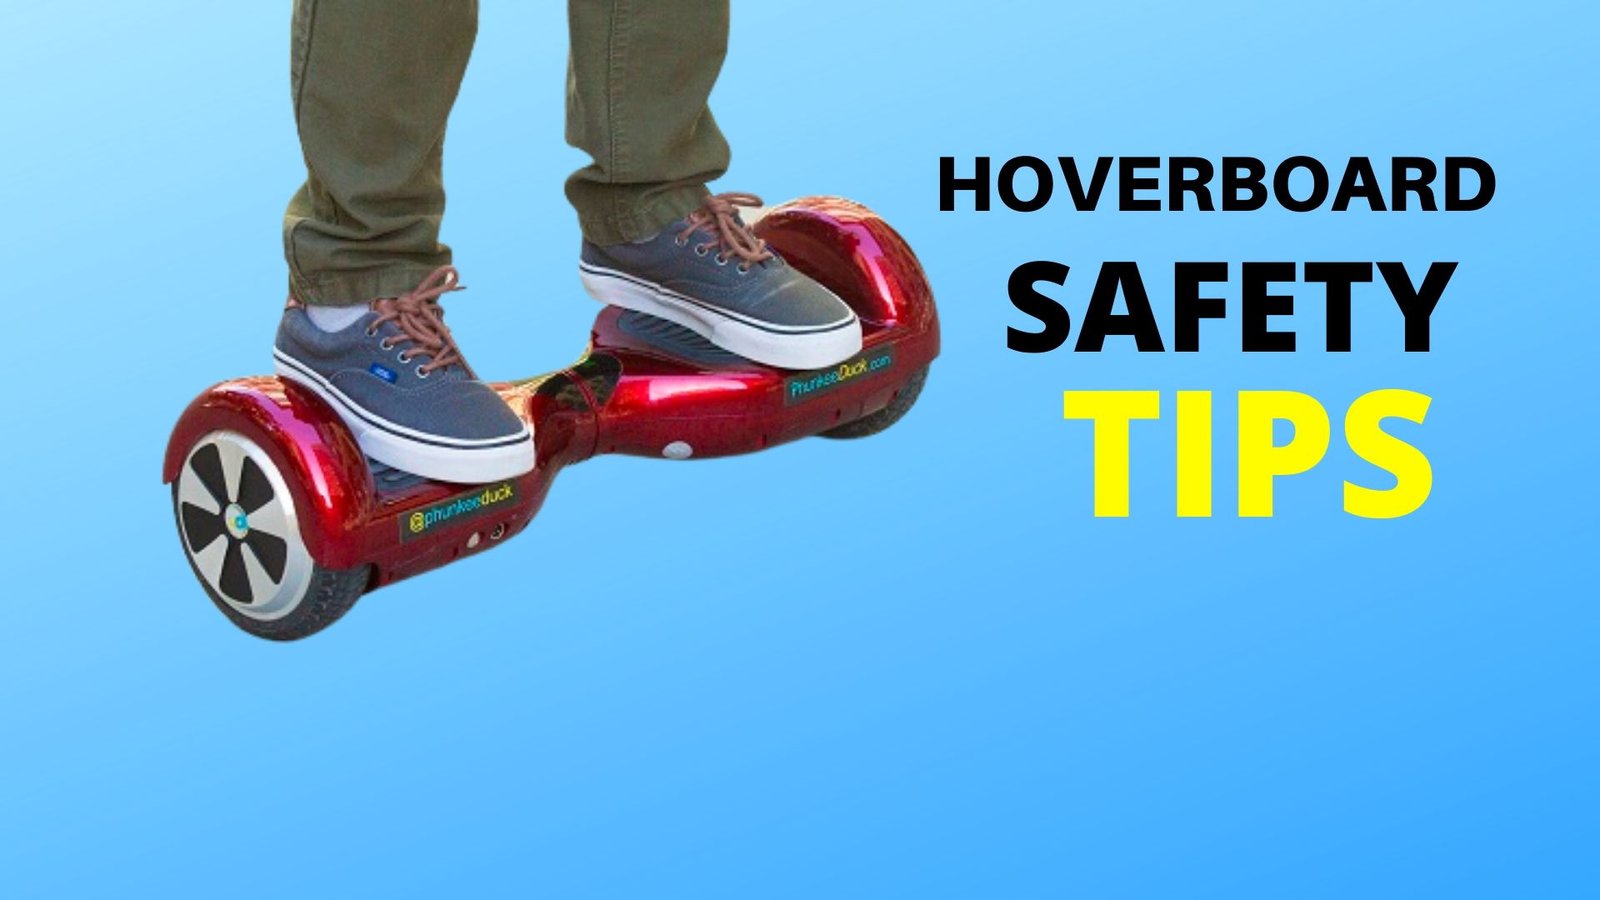 Hoverboard Safety Tips For Riding